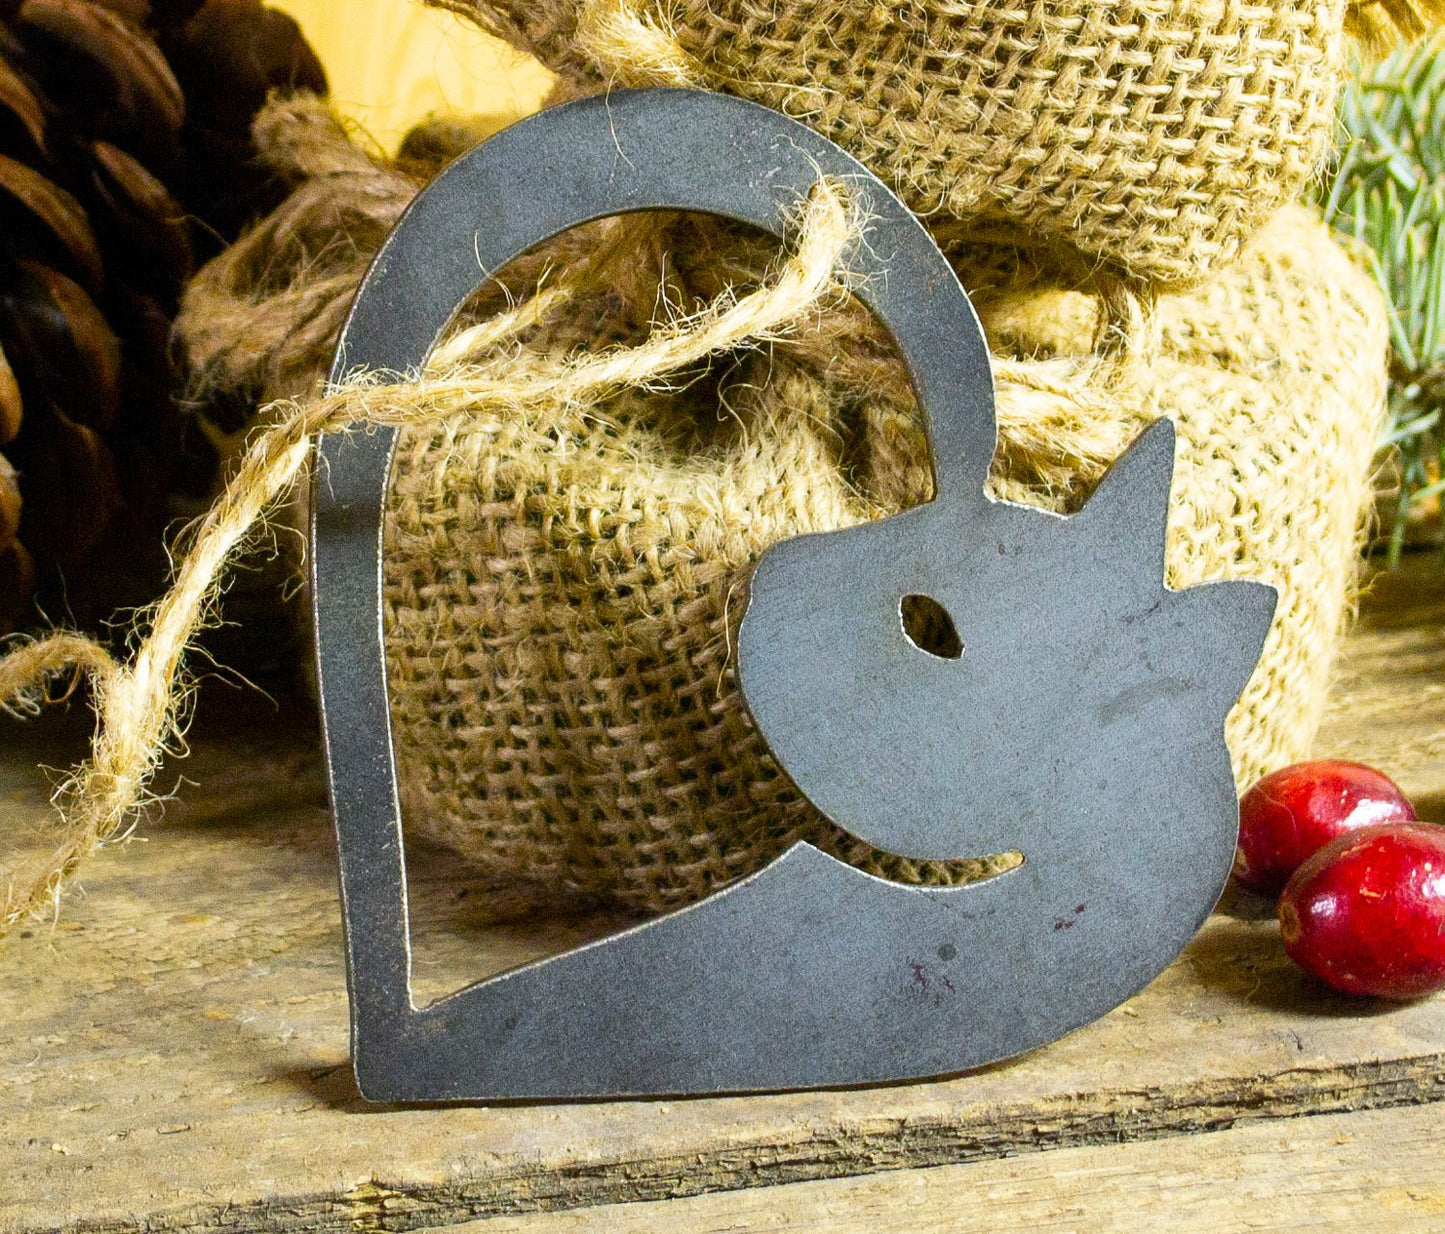 Cat Heart Metal Christmas Ornament Tree Stocking Stuffer Party Favor Holiday Decoration Raw Steel Gift Recycled Nature Home Decor